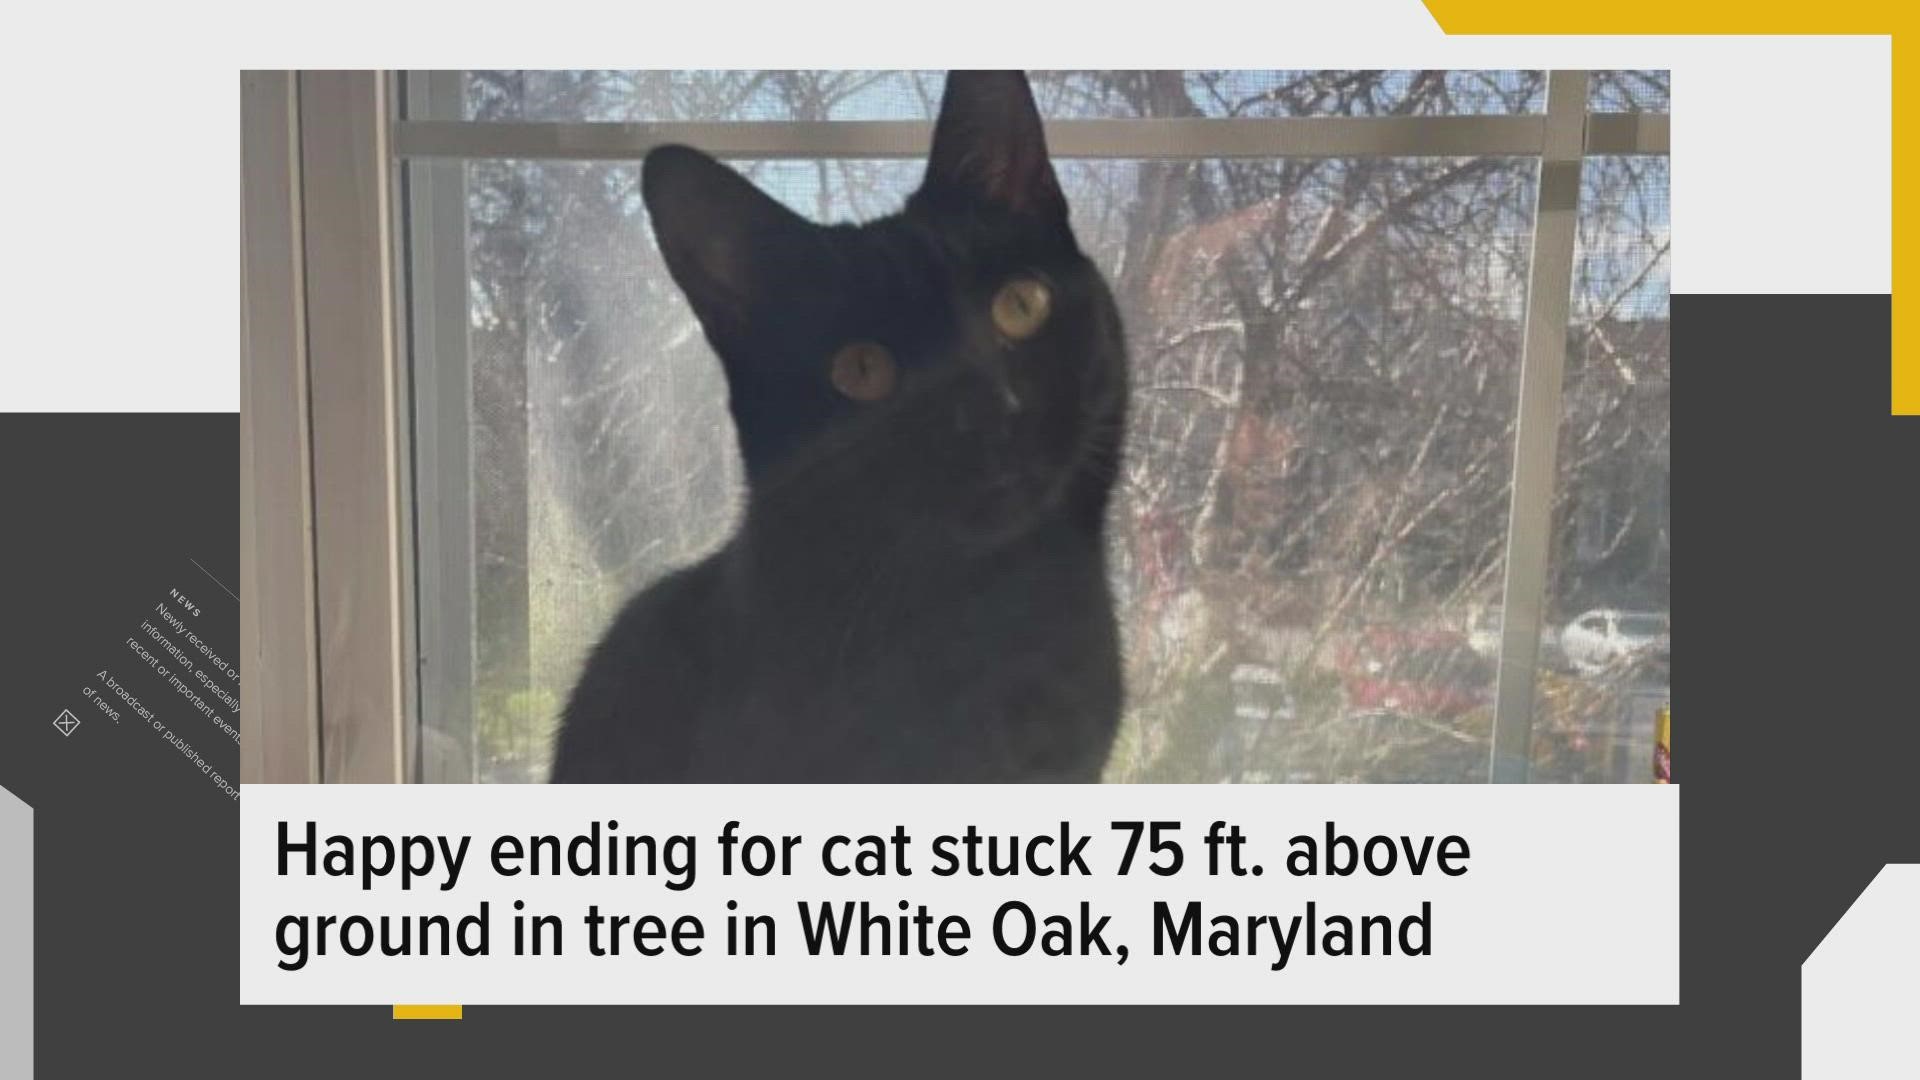 Tutu, a 1-year-old cat, had been missing from her home since Sunday. A  neighbor found her stuck in a tree Monday, 75-feet above ground. https://bit.ly/3FG4Sng